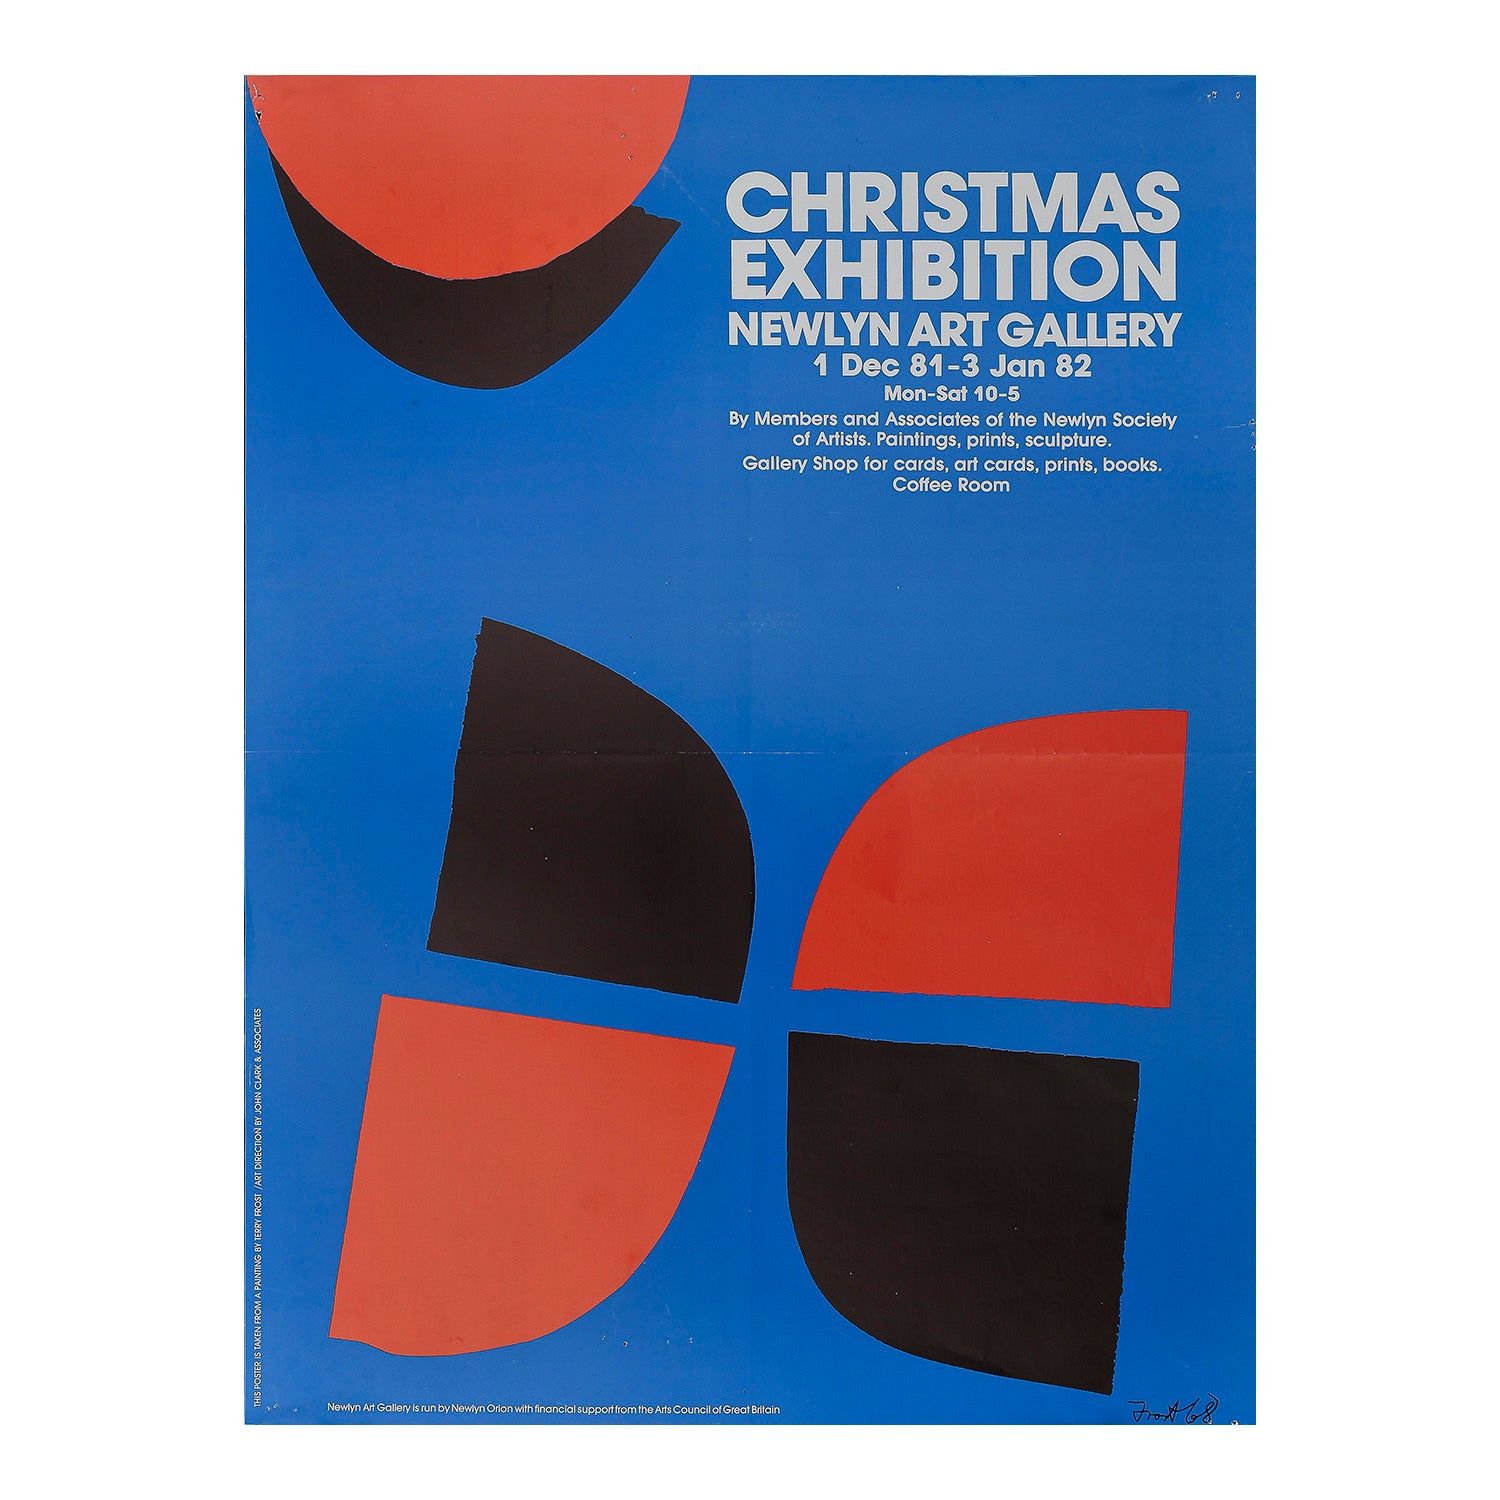 Original art exhibition poster, Christmas Exhibition, held at the Newlyn Art Gallery, 1981. The design features a 1968 painting by the British abstract artist Terry Frost (1915 – 2003)